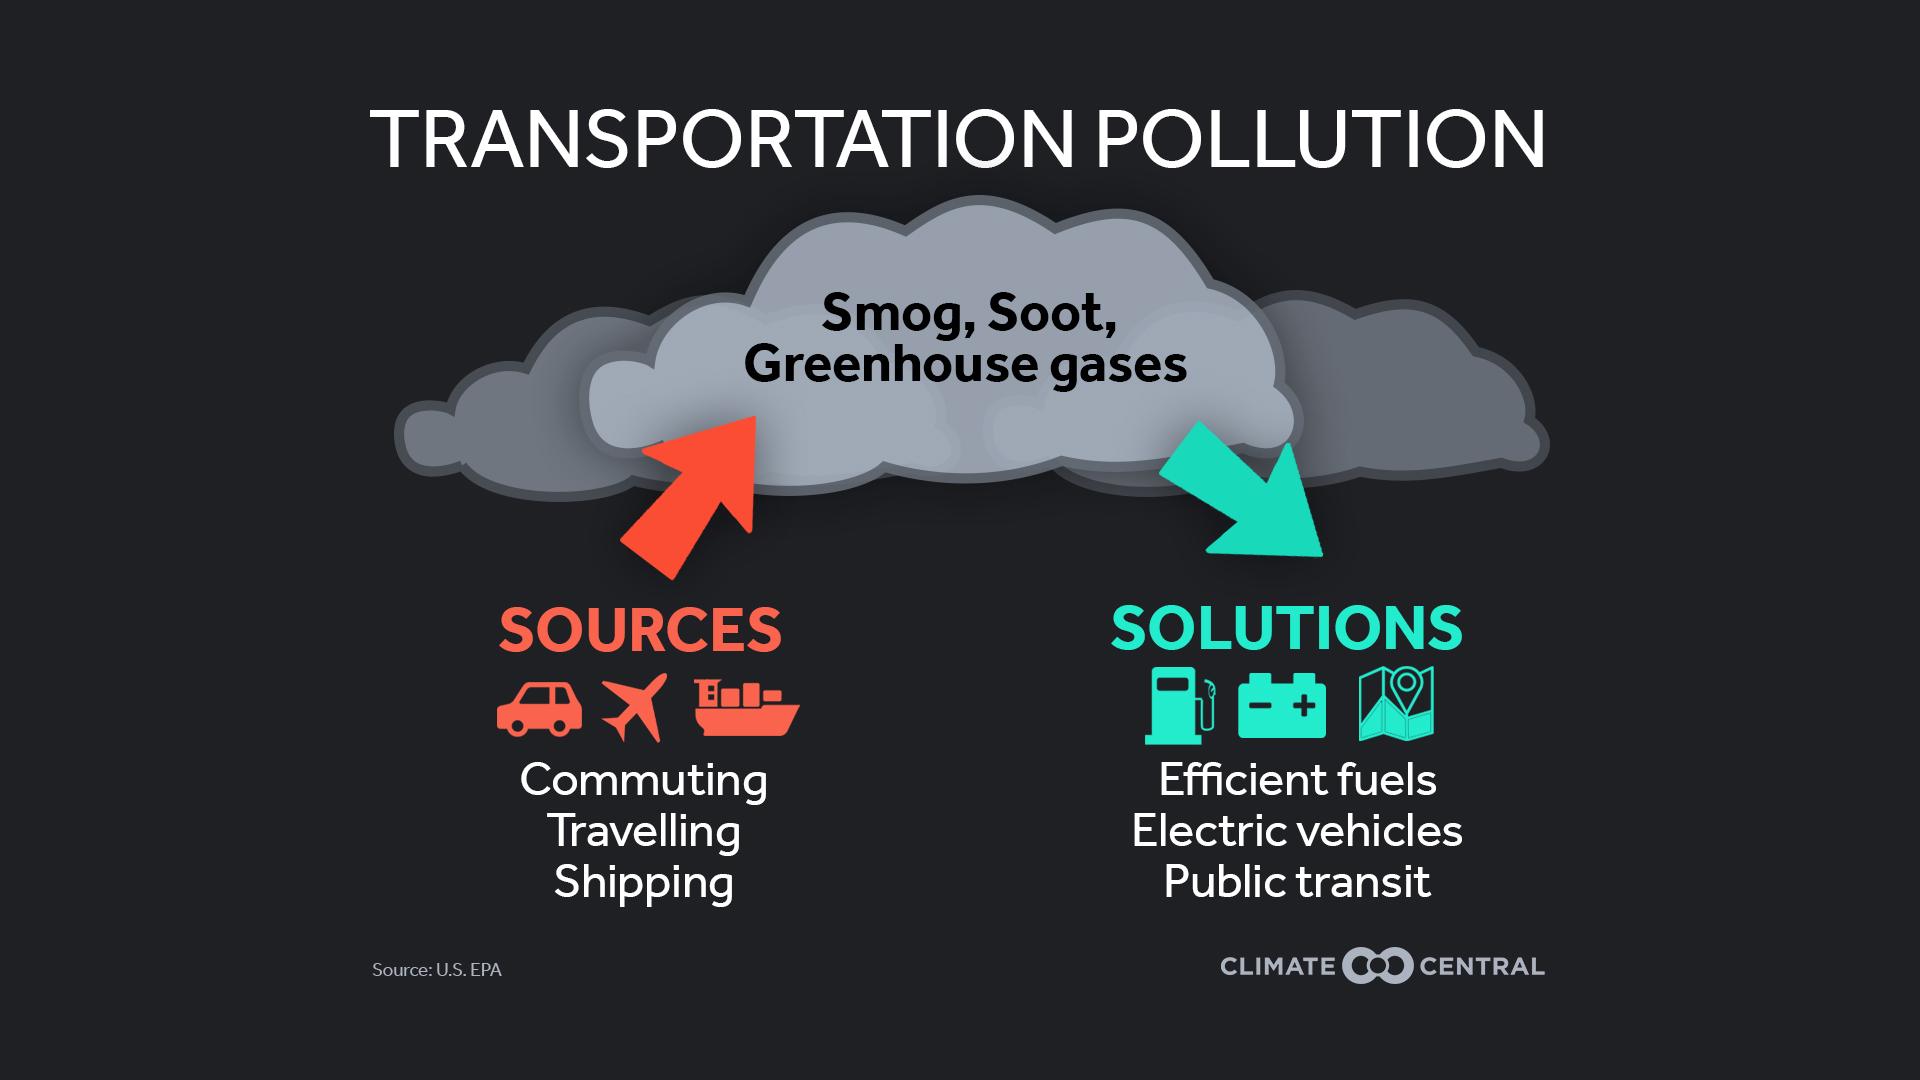 Sources and Solutions for Transportation Pollution - Travel and Air Pollution During COVID-19